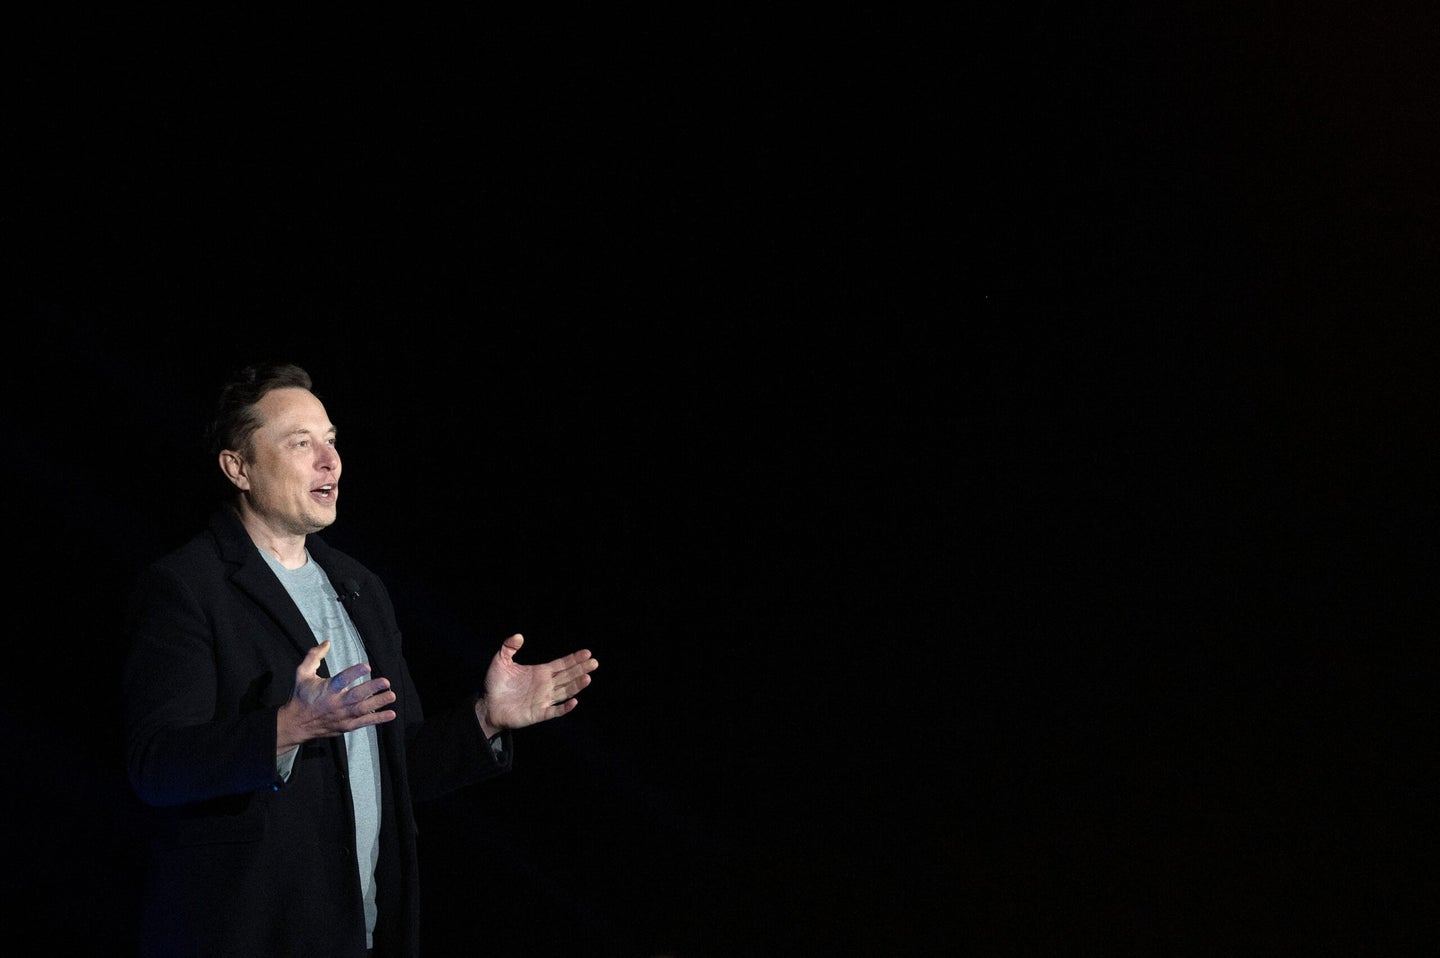 Musk's Neuralink was once again met with skepticism from industry experts.